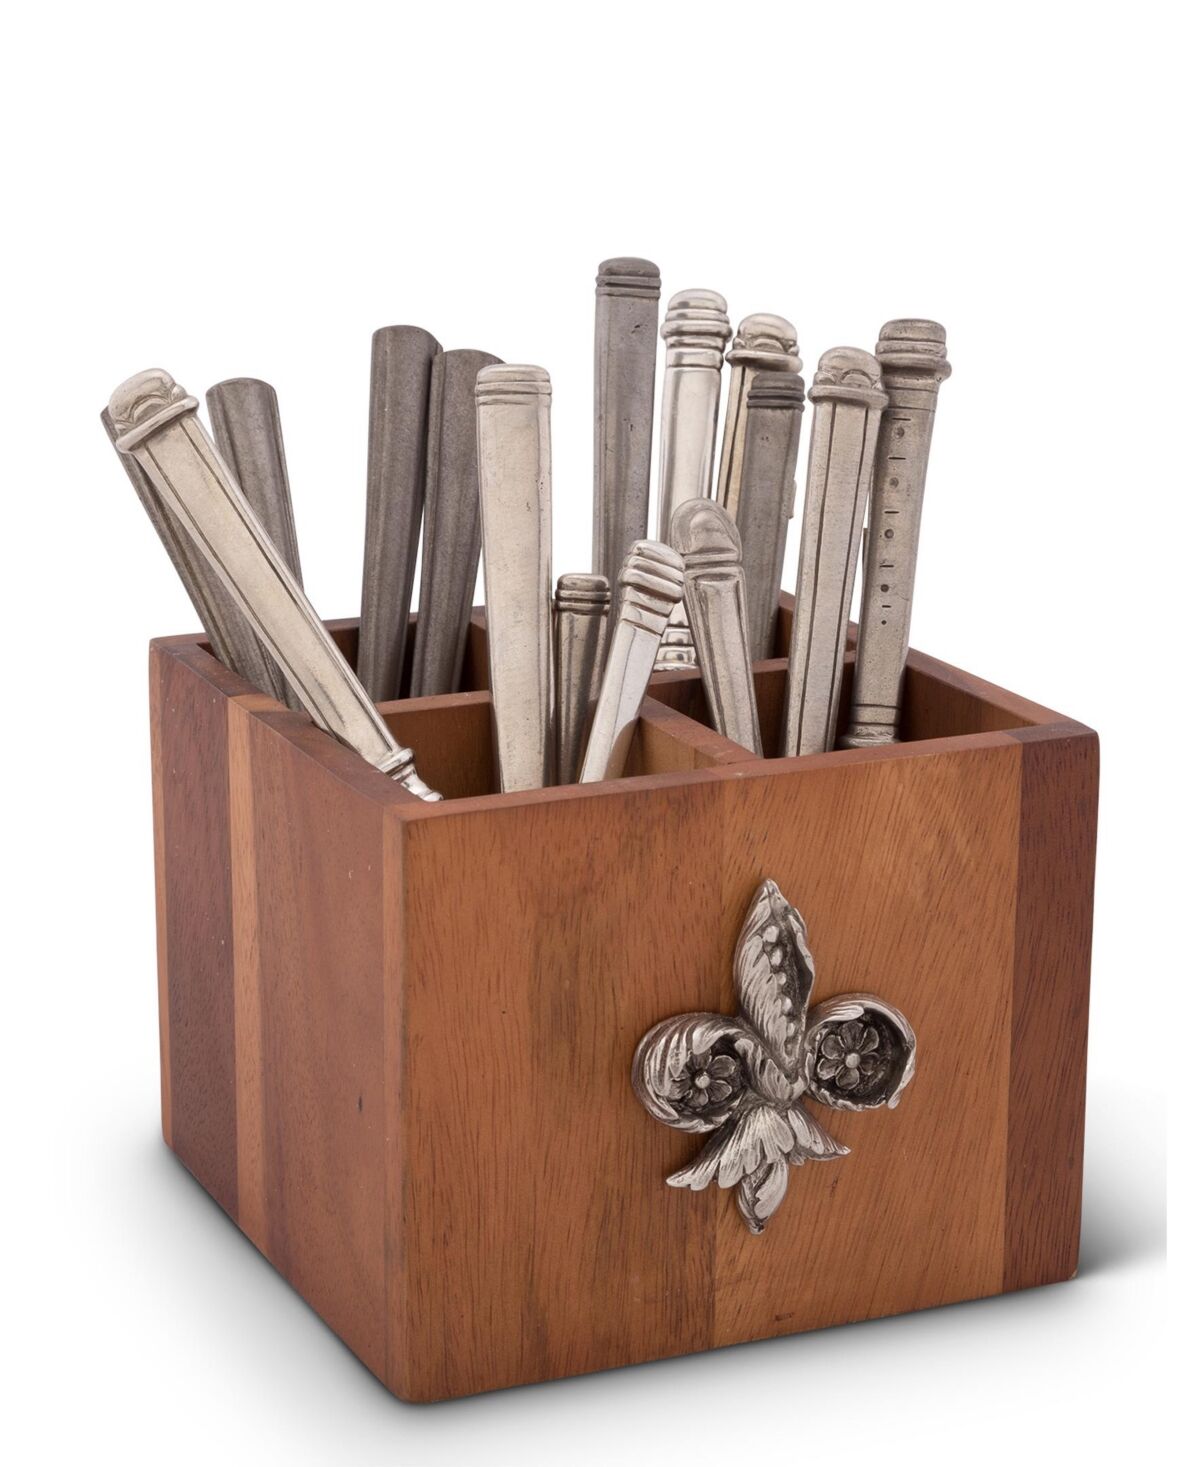 Vagabond House Square Caddy Acacia Wood Flatware, Serve Ware, Utensil, Carry-All Holder with Solid Pewter Fleur De Lis Accent, 4 Compartments - Pewter